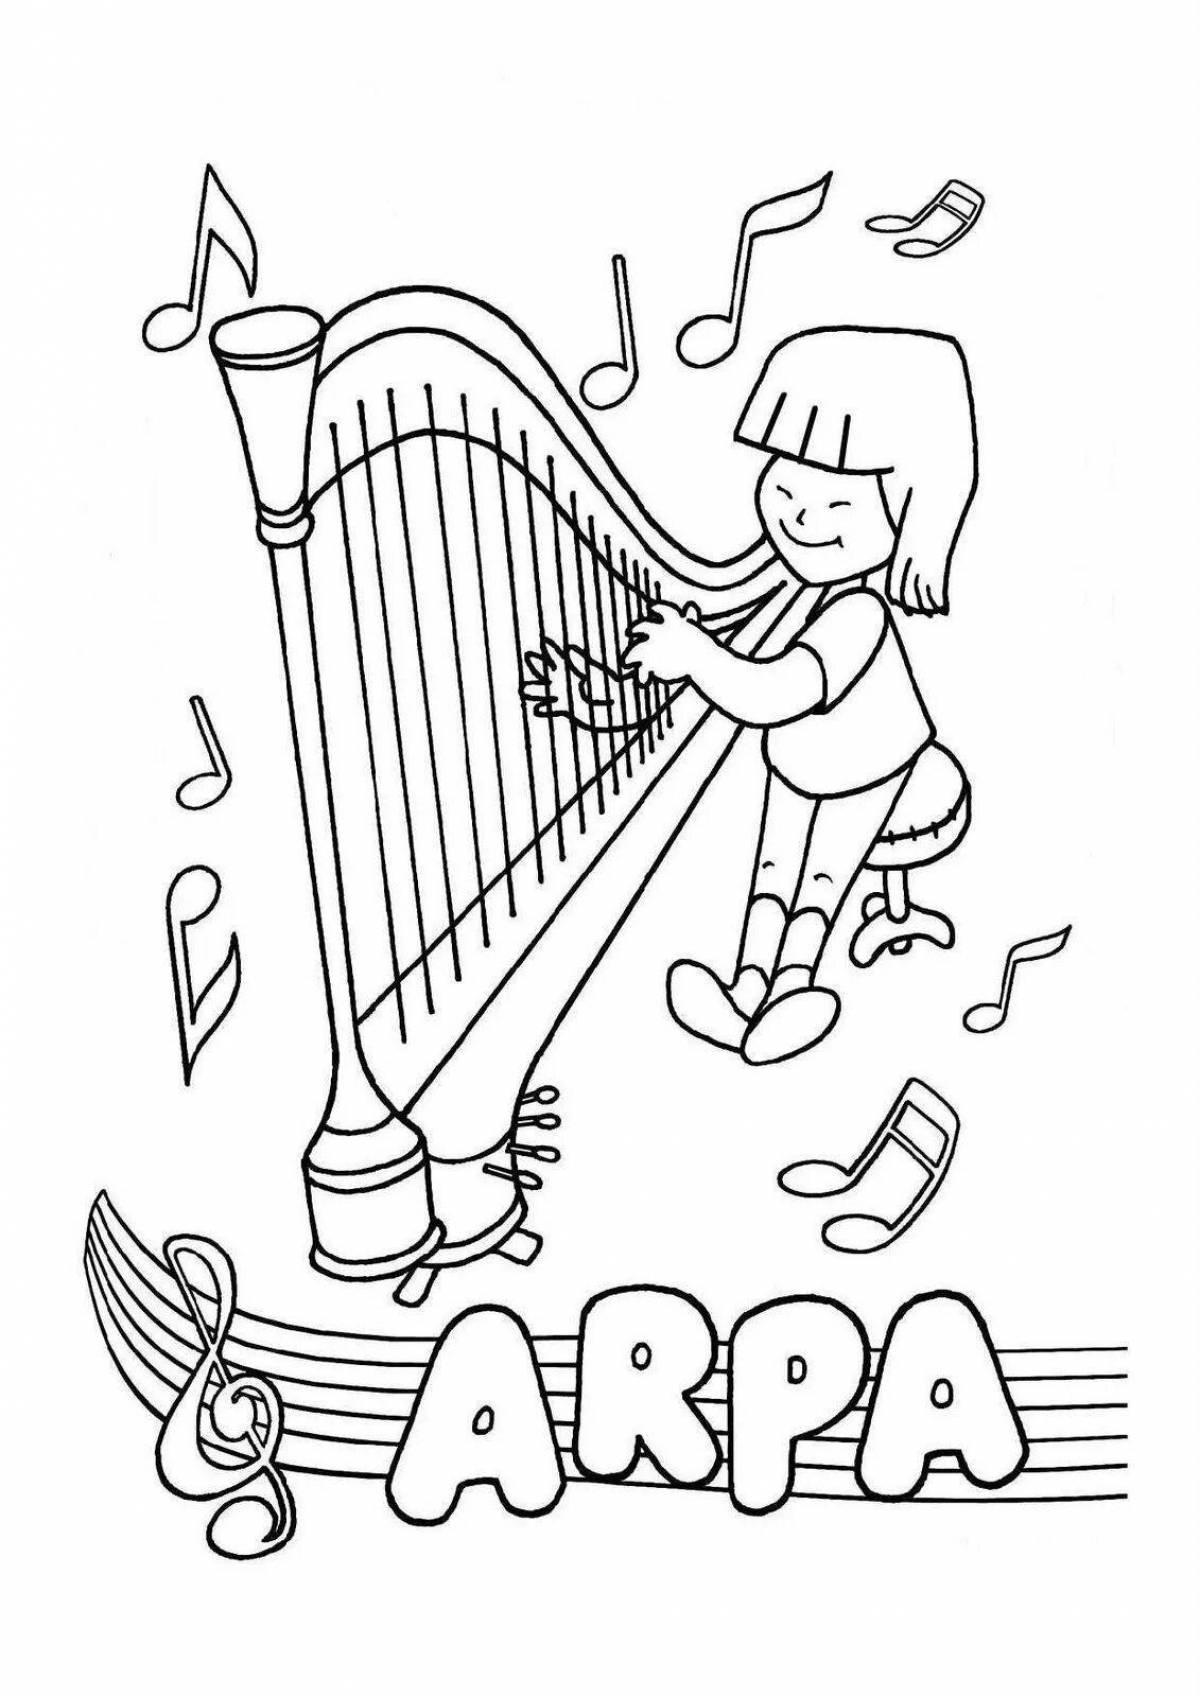 Colorful musical coloring grade 1